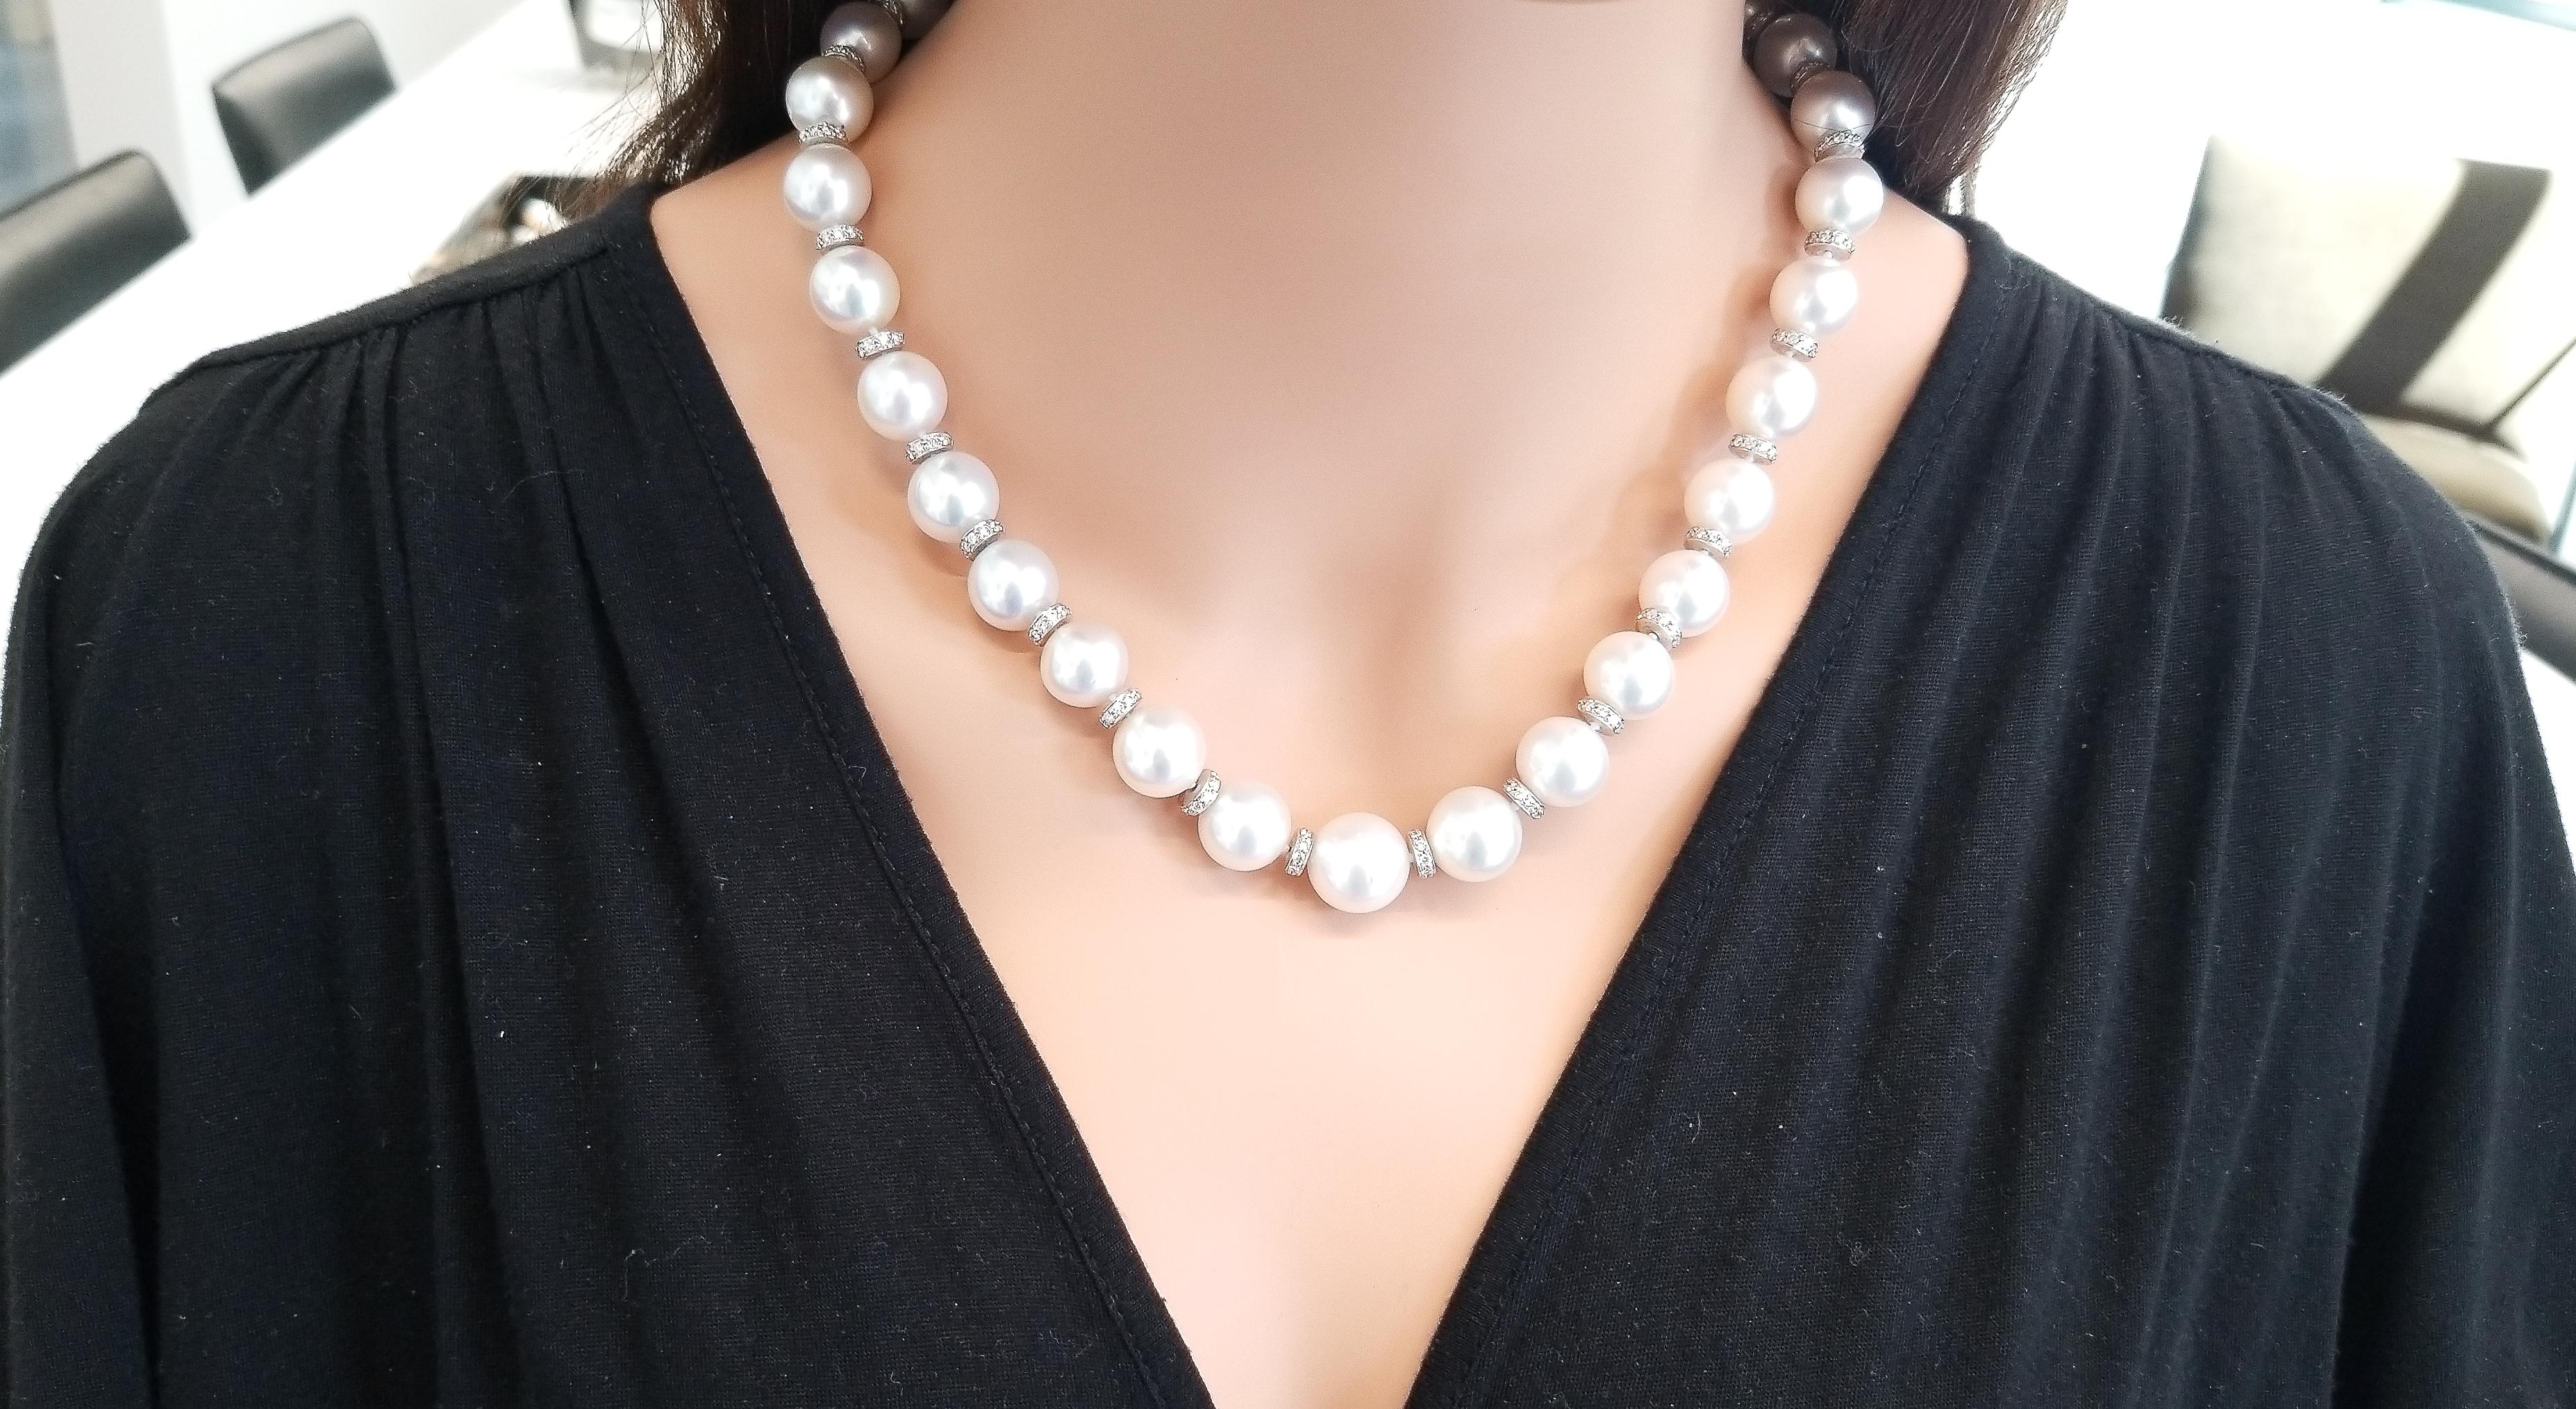 This large, sophisticated strand of pearls features white South Sea pearls that are an exotic luxury. This necklace features 12-14 millimeter South Sea pearls, perfectly ivory white color matched. Dazzling diamond roundels are stationed between each